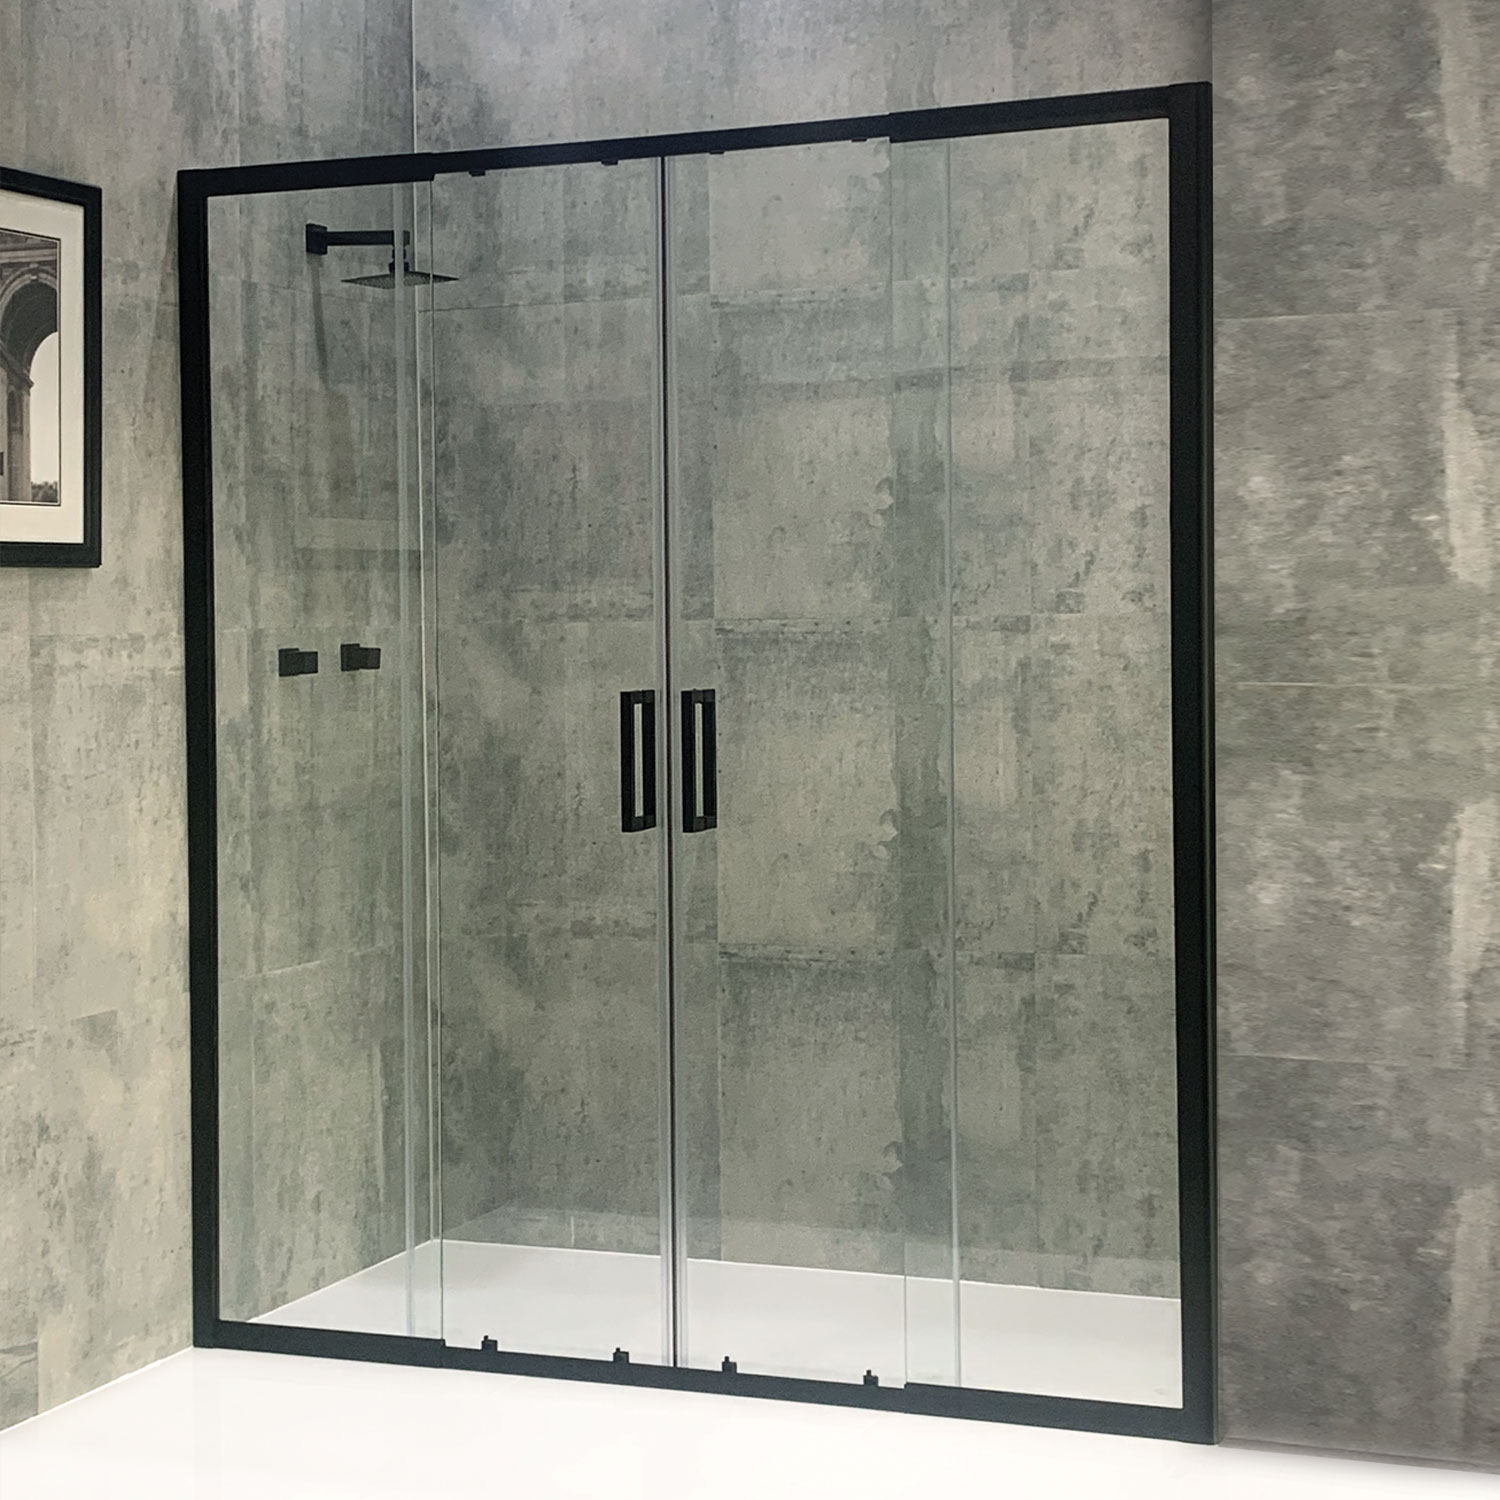 Avanti Double Sliding Doors Shower Screen Height 1950mm with 100mm Adjustable width from 1200mm to 1300mm (Matte Black)